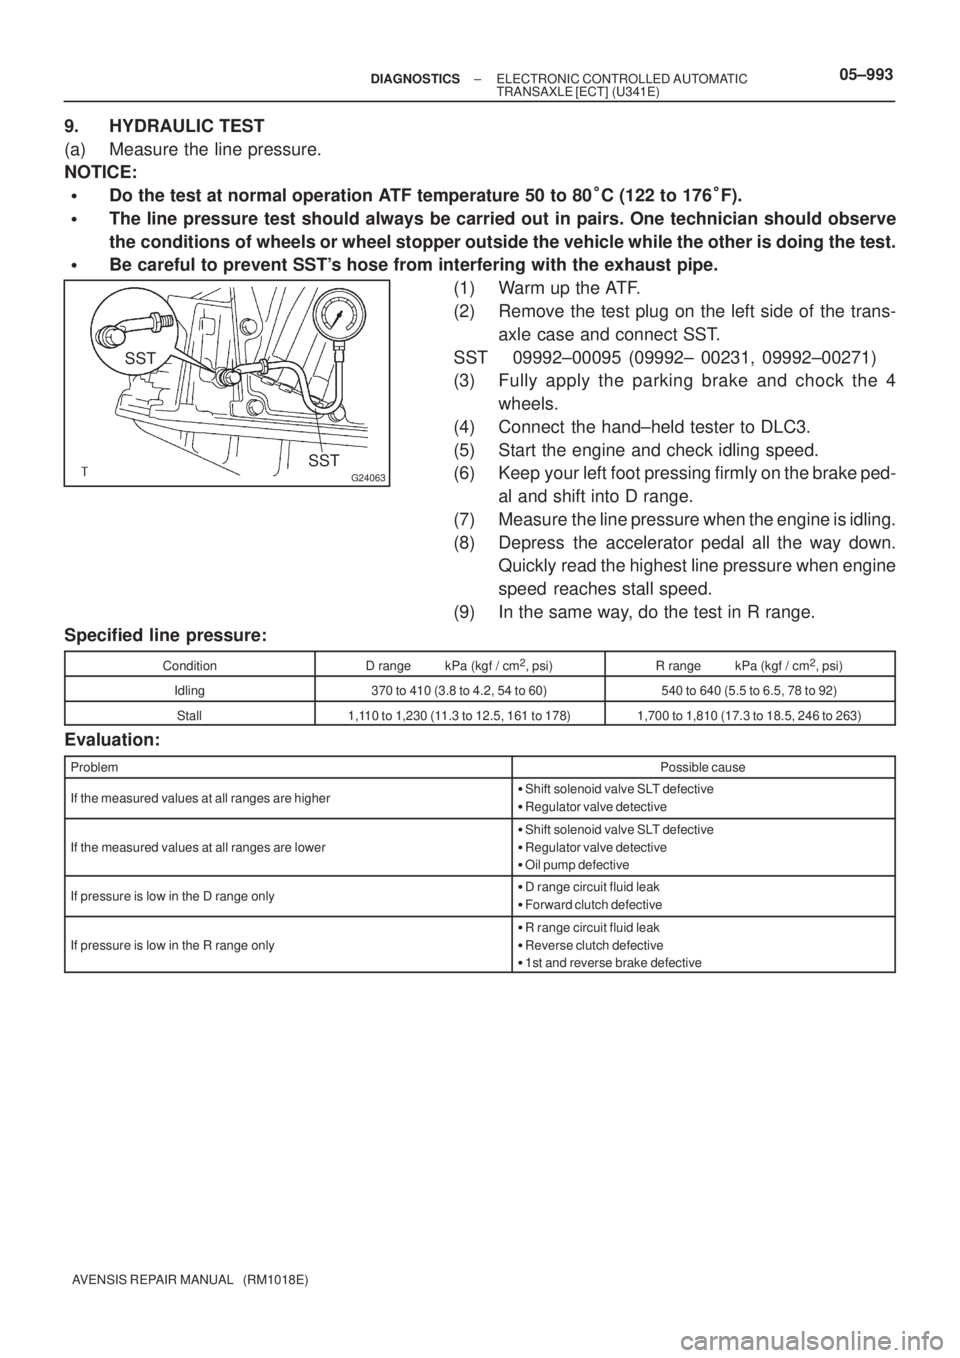 TOYOTA AVENSIS 2005  Service Repair Manual G24063
SST
SST
± DIAGNOSTICSELECTRONIC CONTROLLED AUTOMATIC
TRANSAXLE [ECT] (U341E)05±993
AVENSIS REPAIR MANUAL   (RM1018E)
9. HYDRAULIC TEST
(a) Measure the line pressure.
NOTICE:
Do the test at n